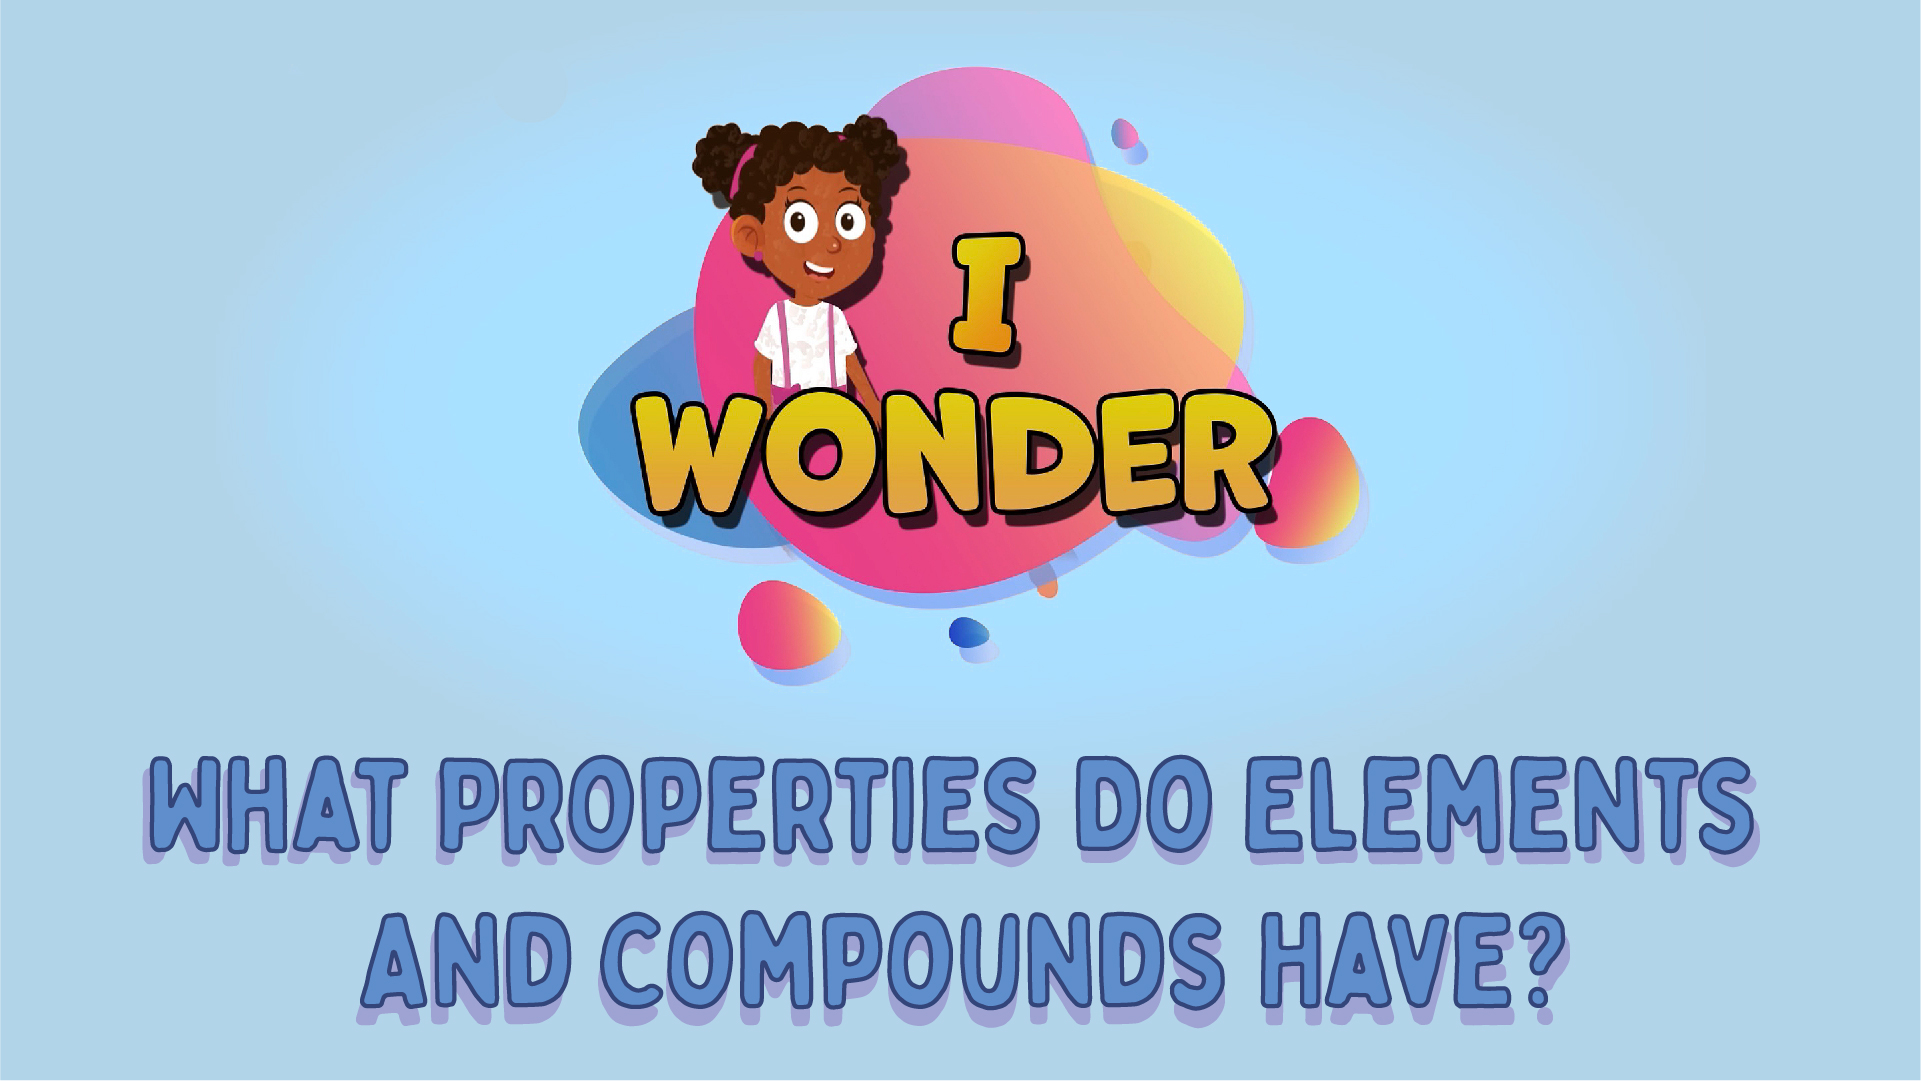 What Properties Do Elements And Compounds Have?